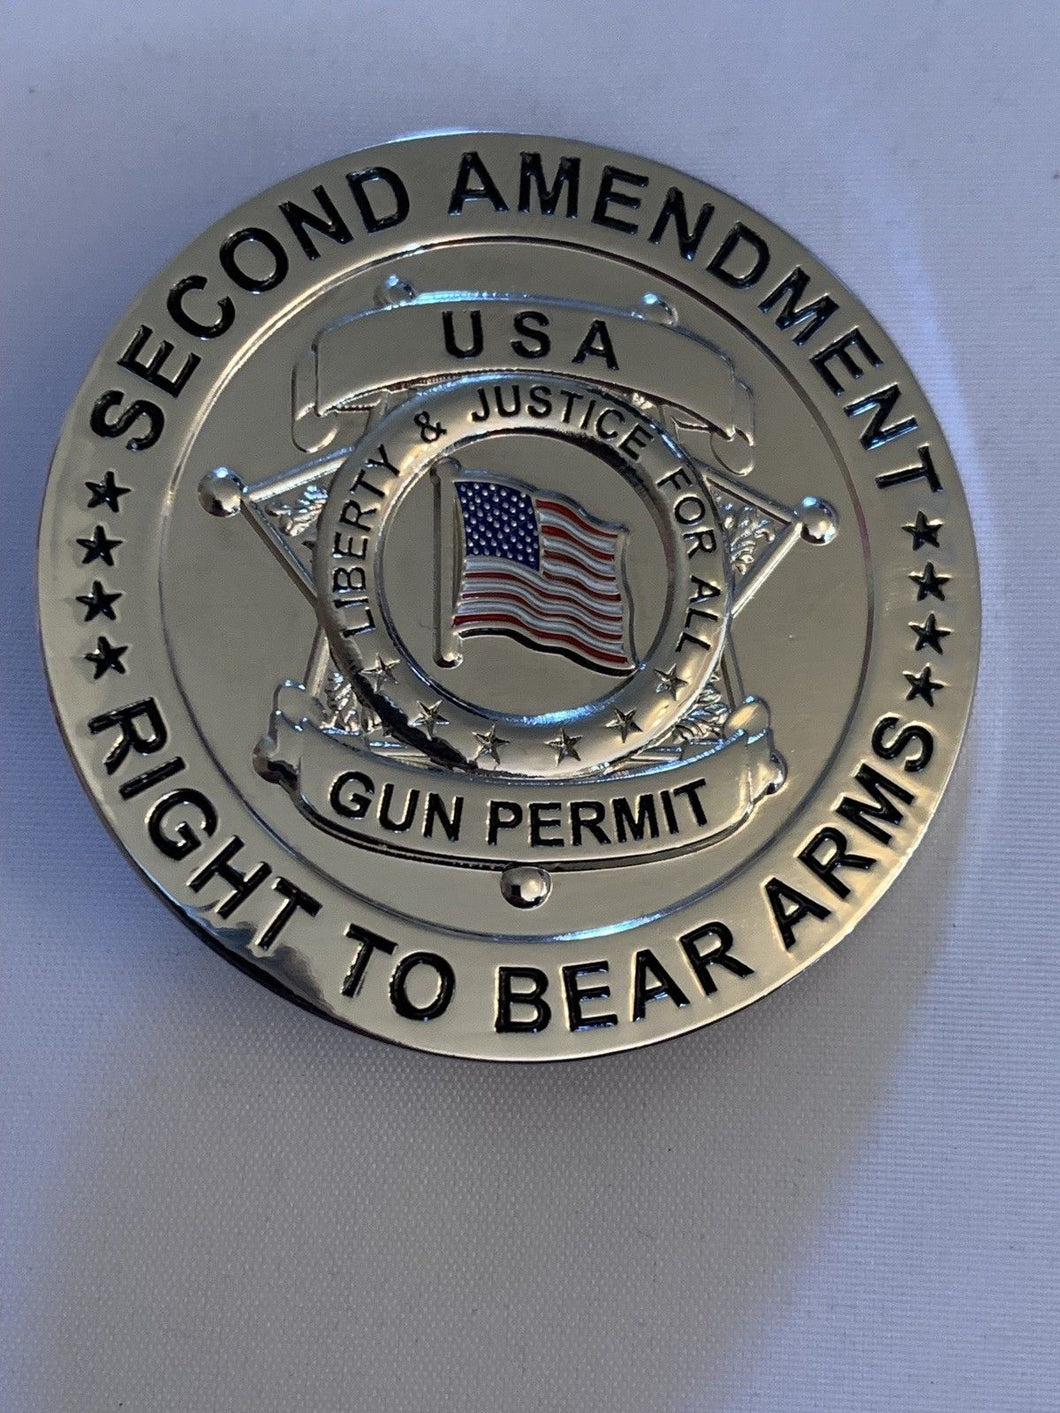 Second Amendment - Right To Bear Arms - Gun Permit (Antique Silver)       3 product ratings